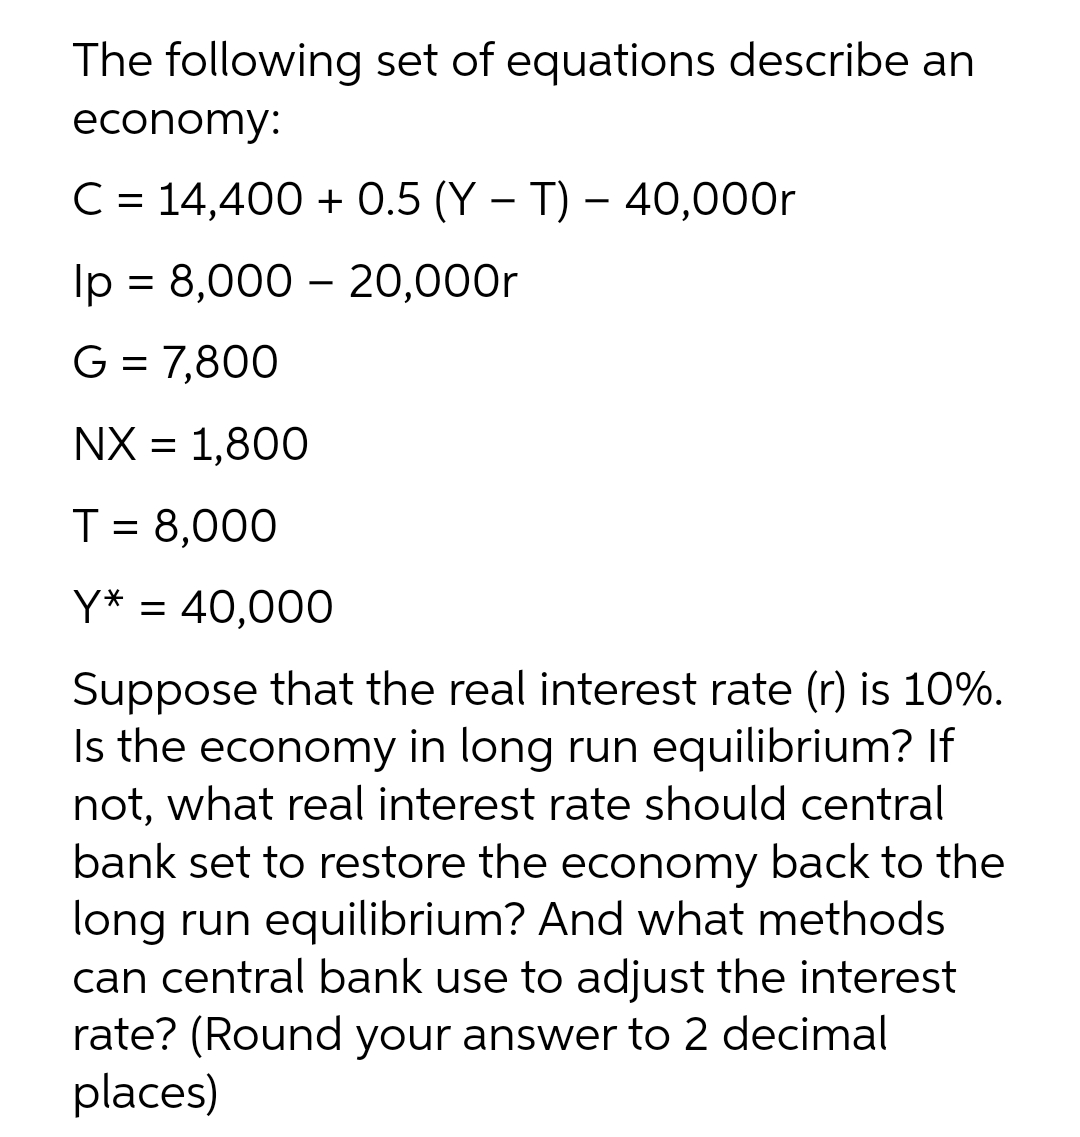 The following set of equations describe an
economy:
C = 14,400 + 0.5 (Y – T) – 40,000r
Ip = 8,000 – 20,000r
G = 7,800
NX = 1,800
T = 8,000
%3D
Y* = 40,000
Suppose that the real interest rate (r) is 10%.
Is the economy in long run equilibrium? If
not, what real interest rate should central
bank set to restore the economy back to the
long run equilibrium? And what methods
can central bank use to adjust the interest
rate? (Round your answer to 2 decimal
places)
